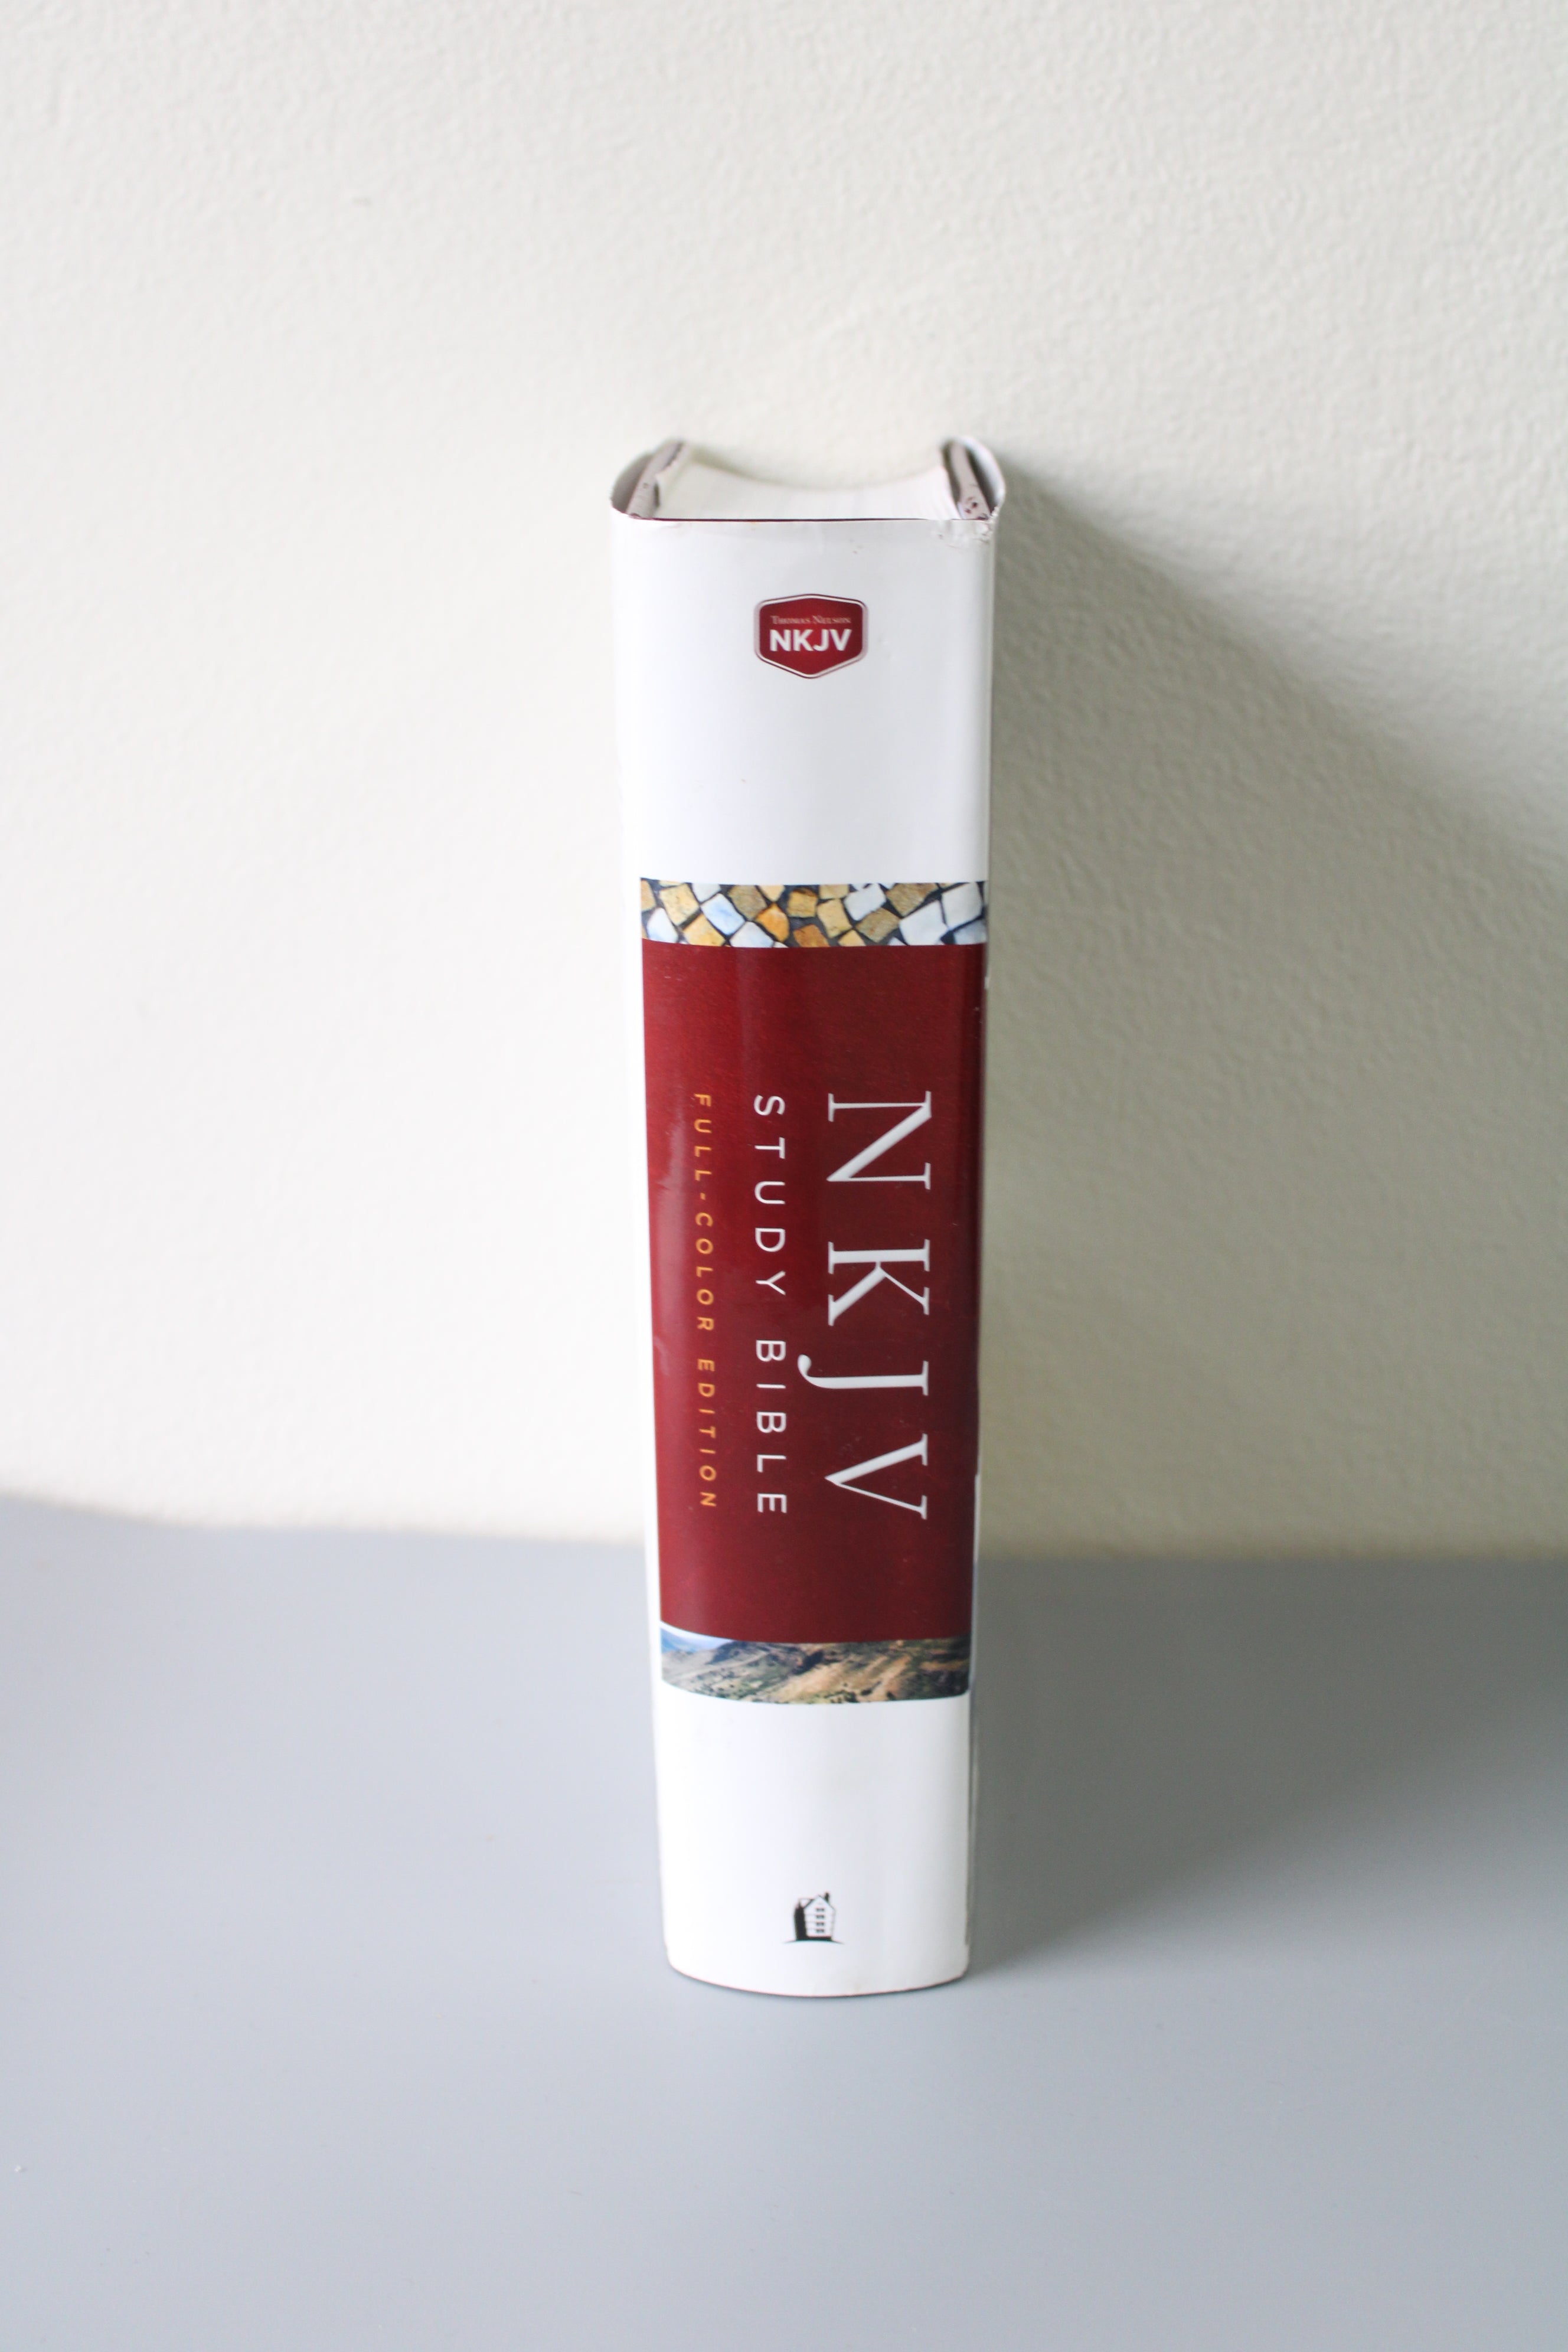 NKJV Study Bible Full-Color Edition: The Complete Resource For Studying God's Word